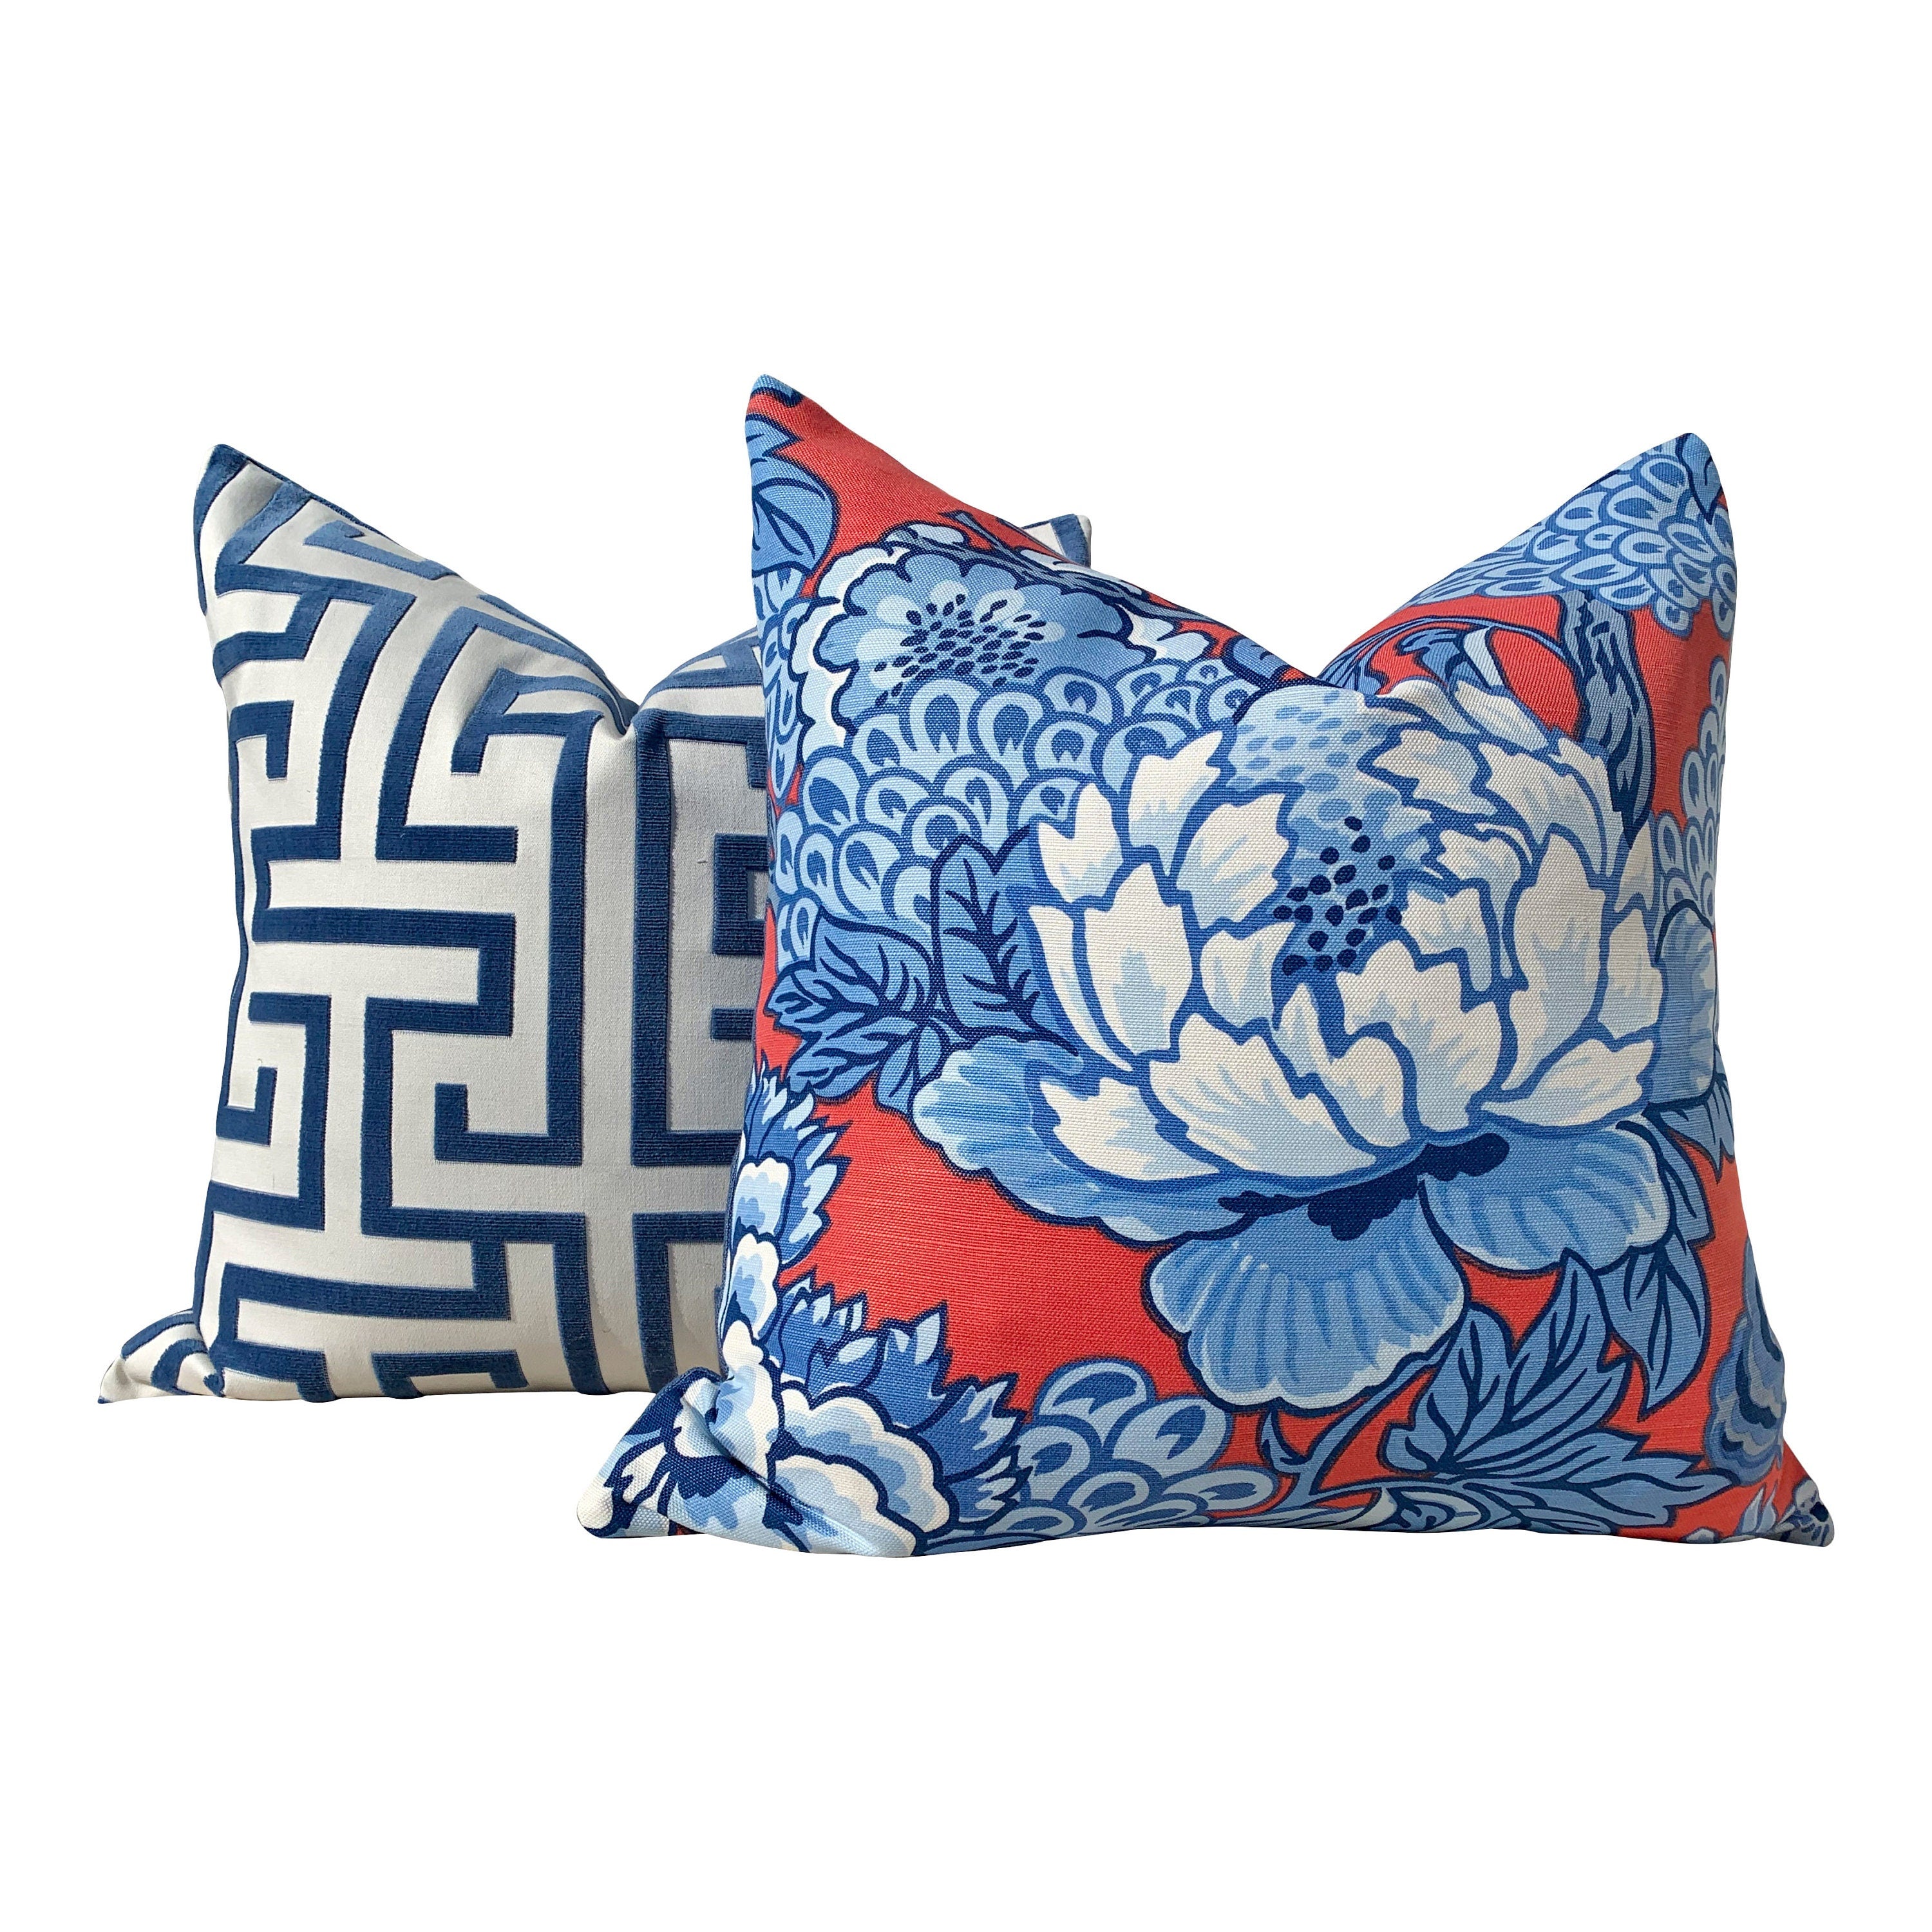 Thibaut Honshu Pillow in Blue and Red. Chinoiserie Floral Pillow, Accent Pillow cover, High End Cushion, Euro Sham, Designer Throw Pillow